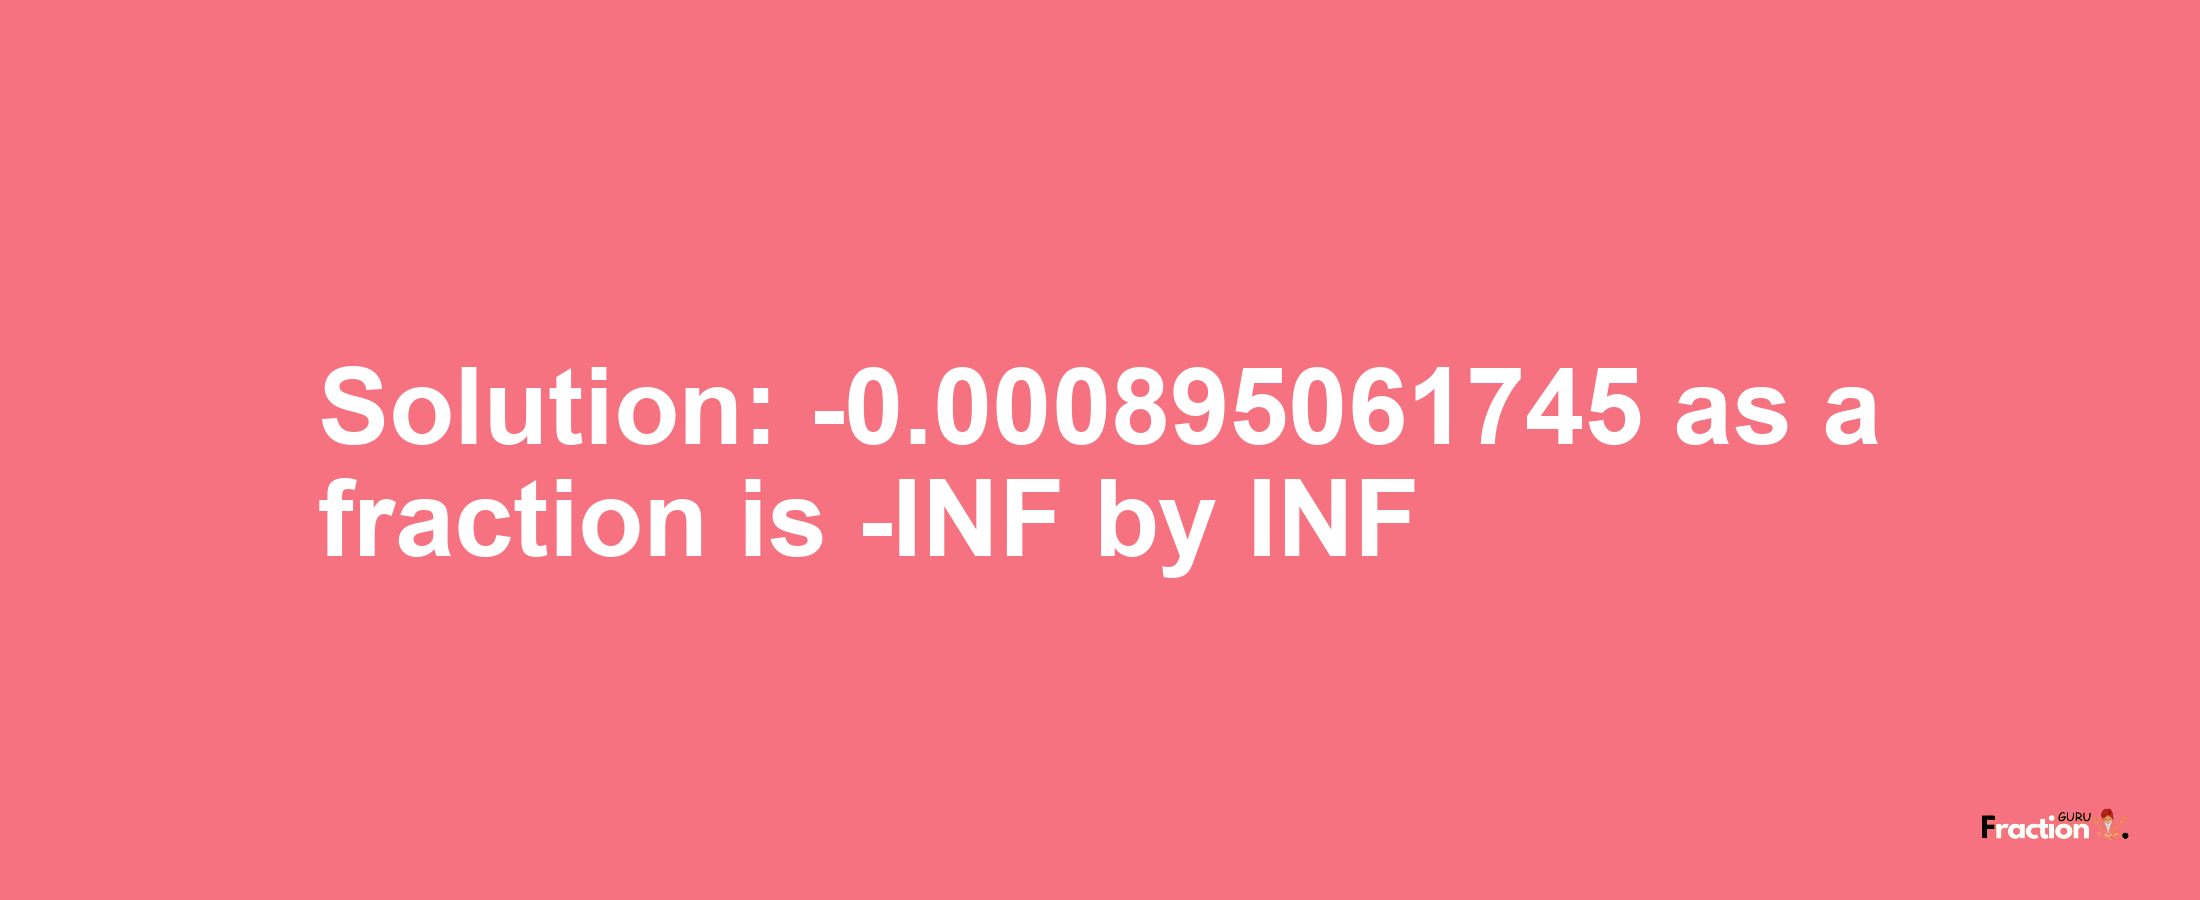 Solution:-0.000895061745 as a fraction is -INF/INF